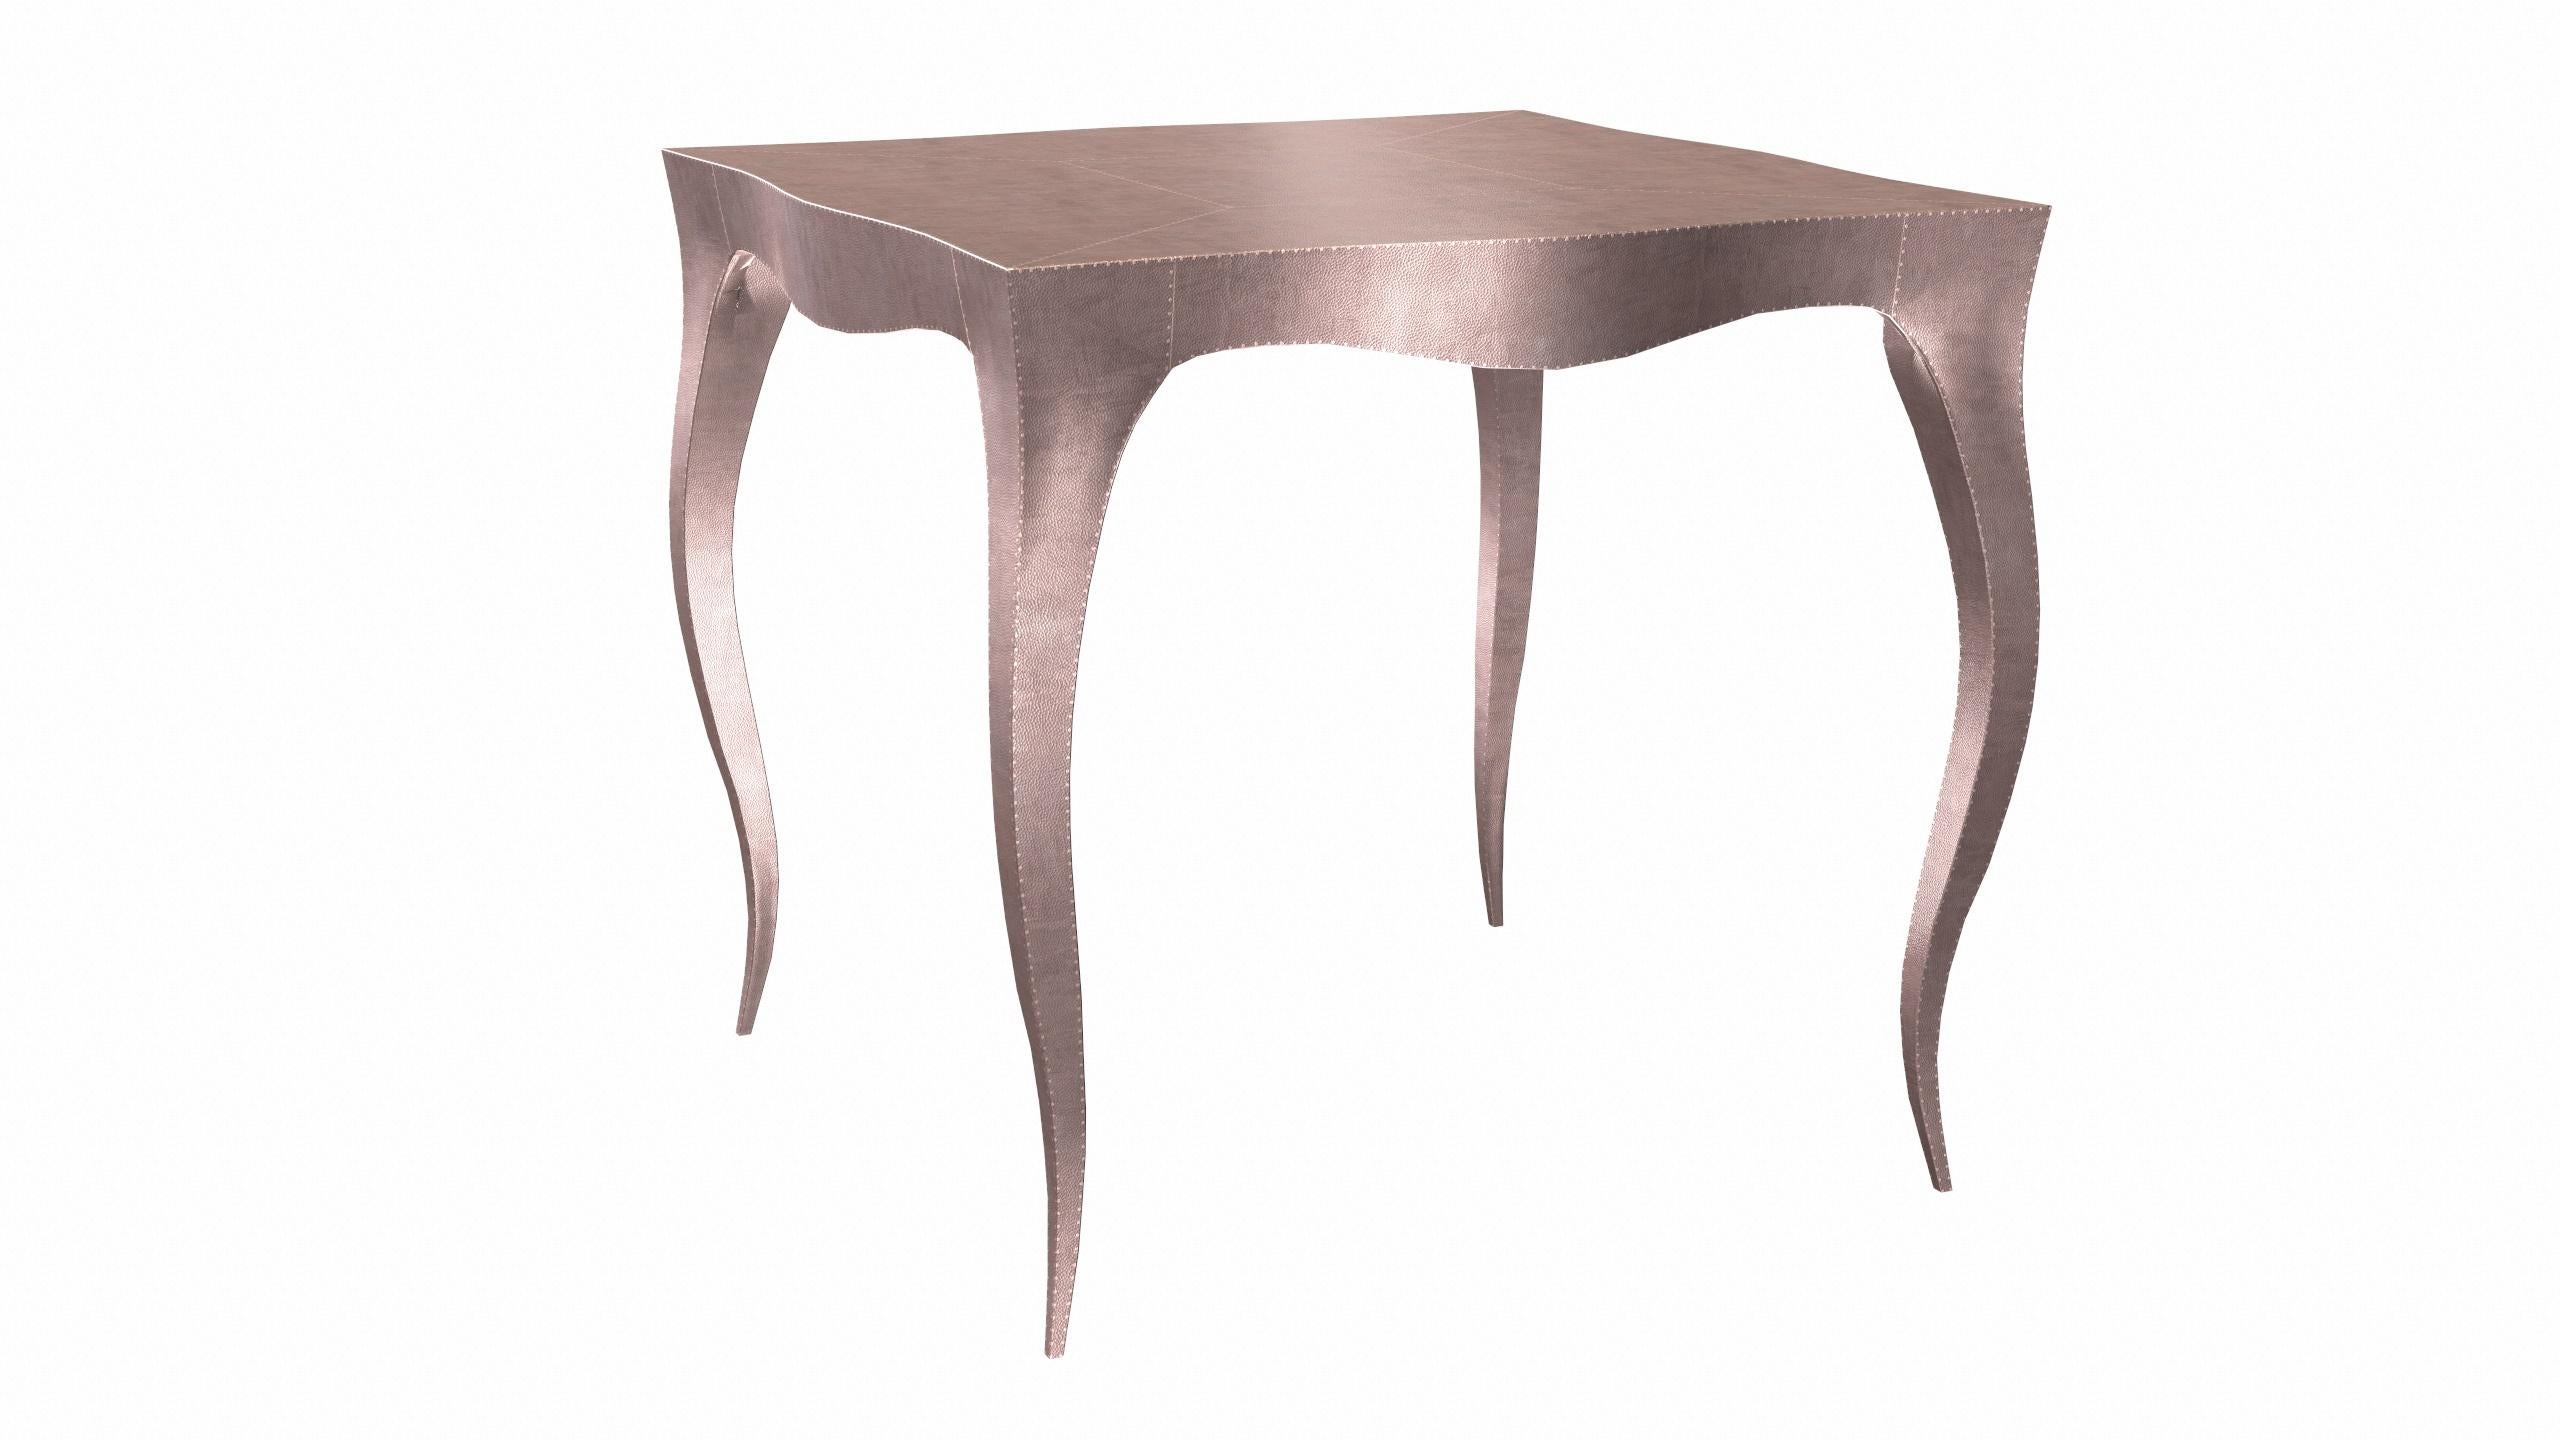 Hand-Carved Louise Art Deco Industrial and Work Tables Mid. Hammered Copper by Paul Mathieu For Sale